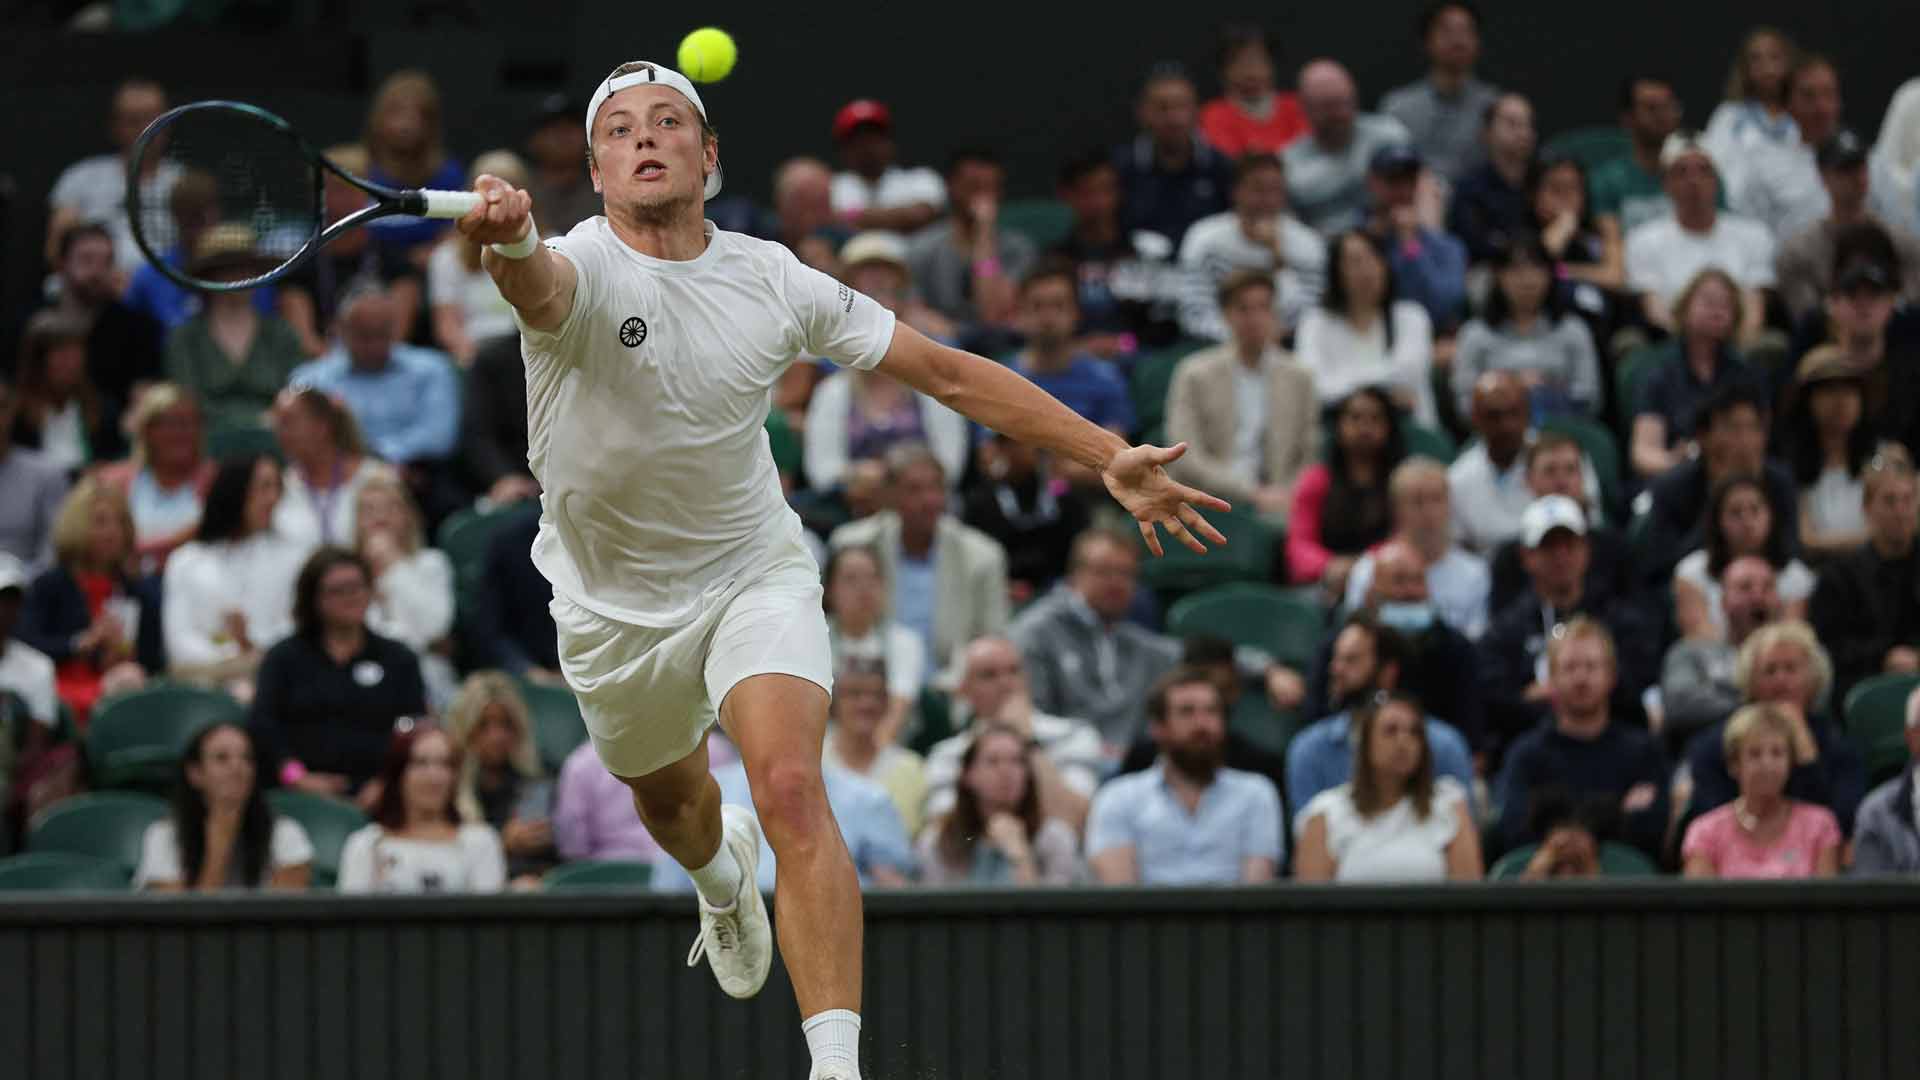 Tim Van Rijthoven in action at <a href='https://www.atptour.com/en/tournaments/wimbledon/540/overview'>Wimbledon</a>, where he reached the fourth round.